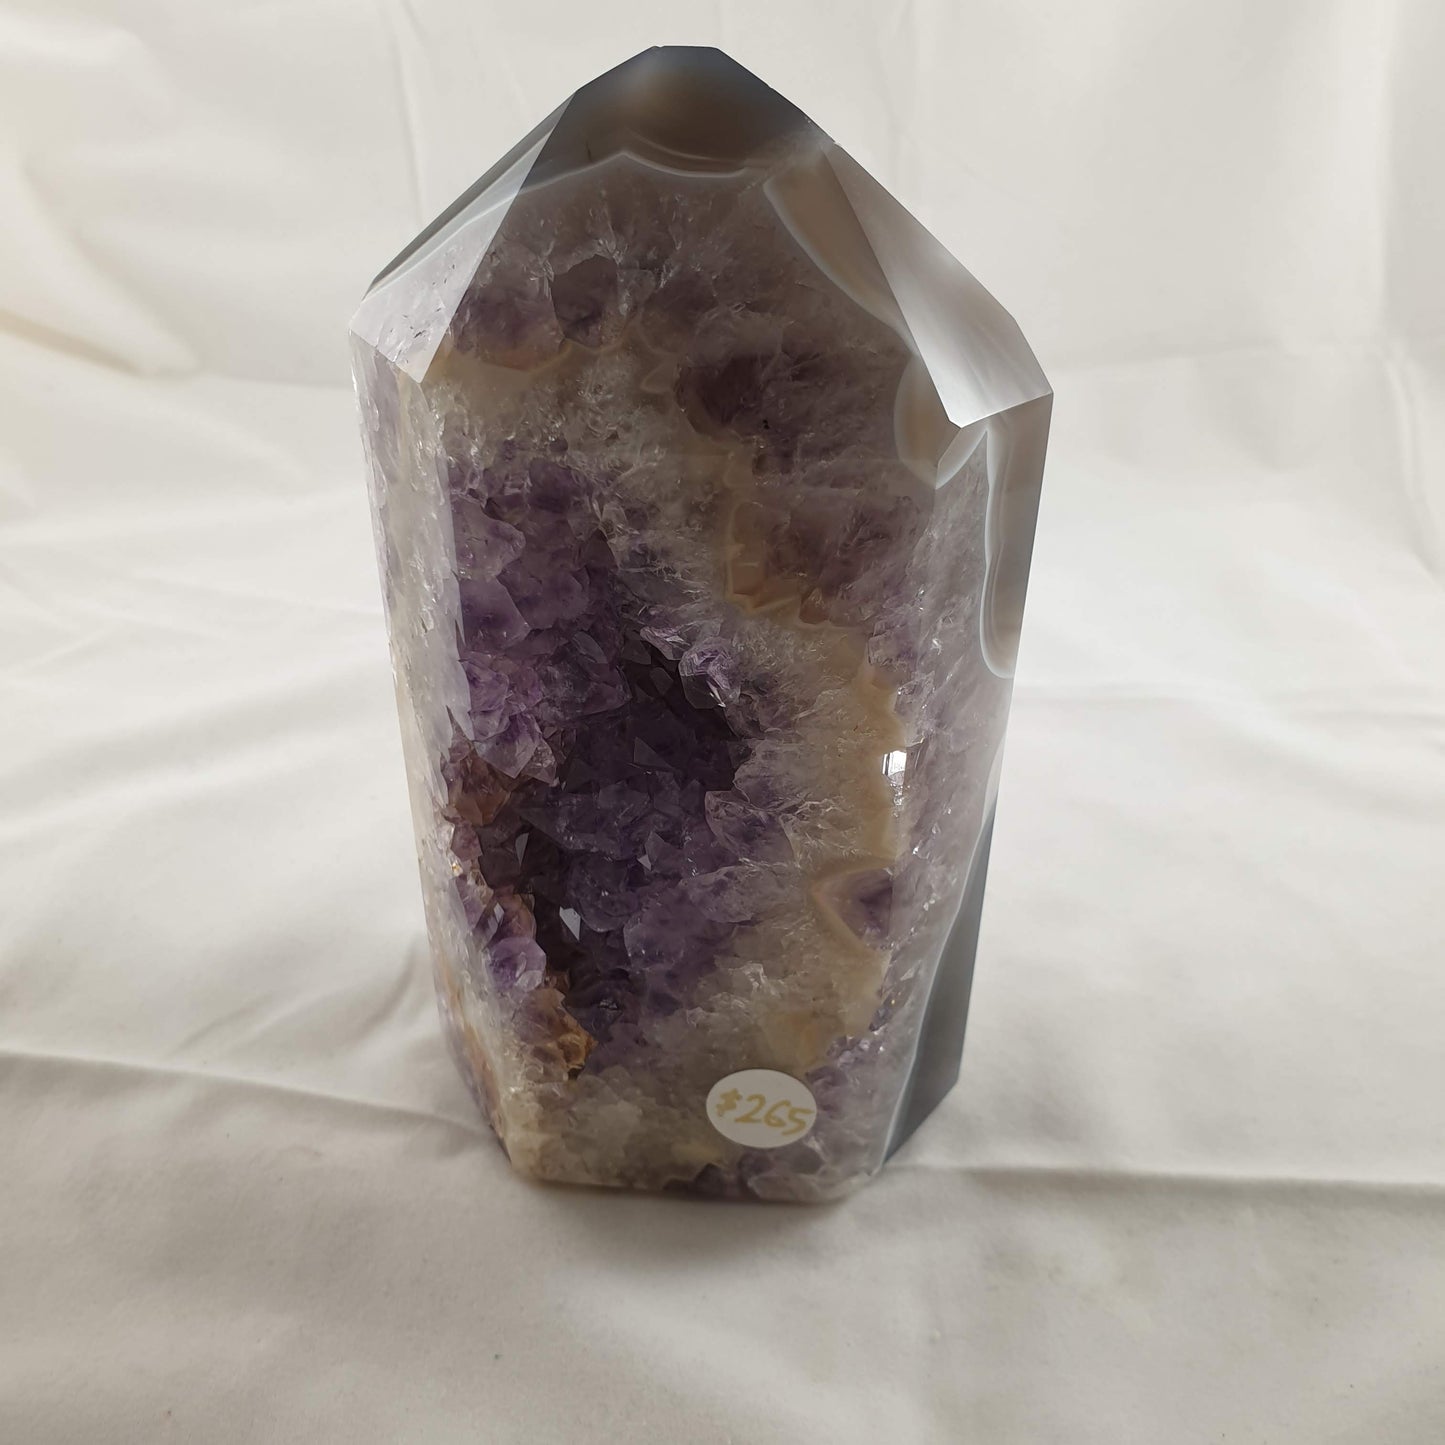 Polished Amethyst Crystal Standing Cave (14cm tall) - Rivendell Shop